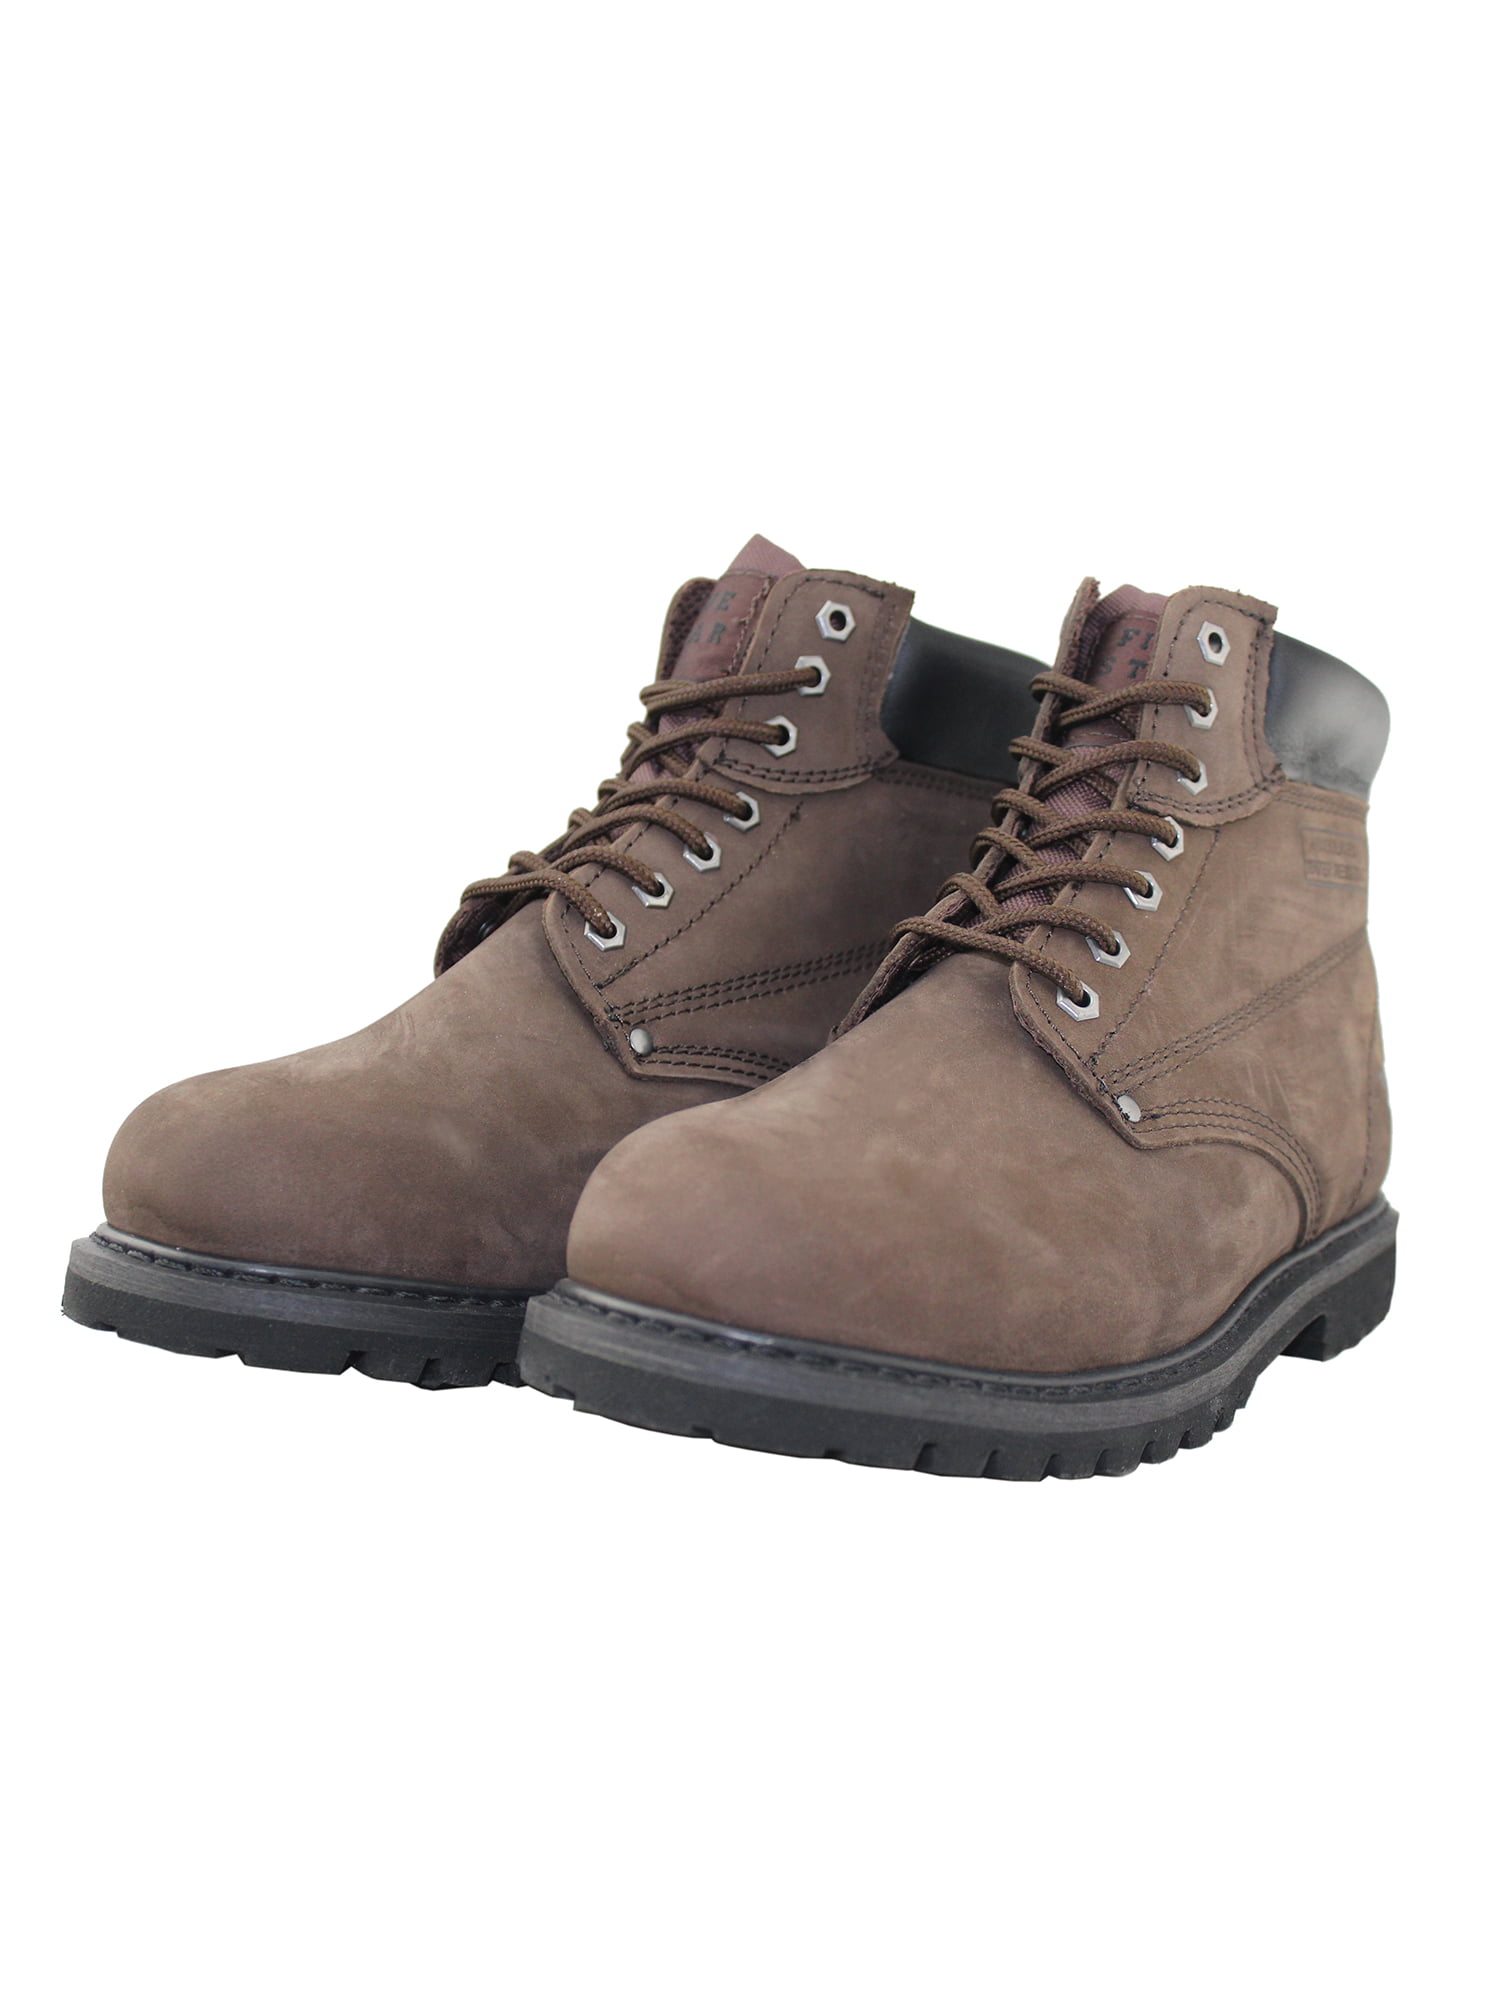 Mens Casual Work Fashion Nubuck Leather Lace-Up Ankle Work Boots - Walmart.com